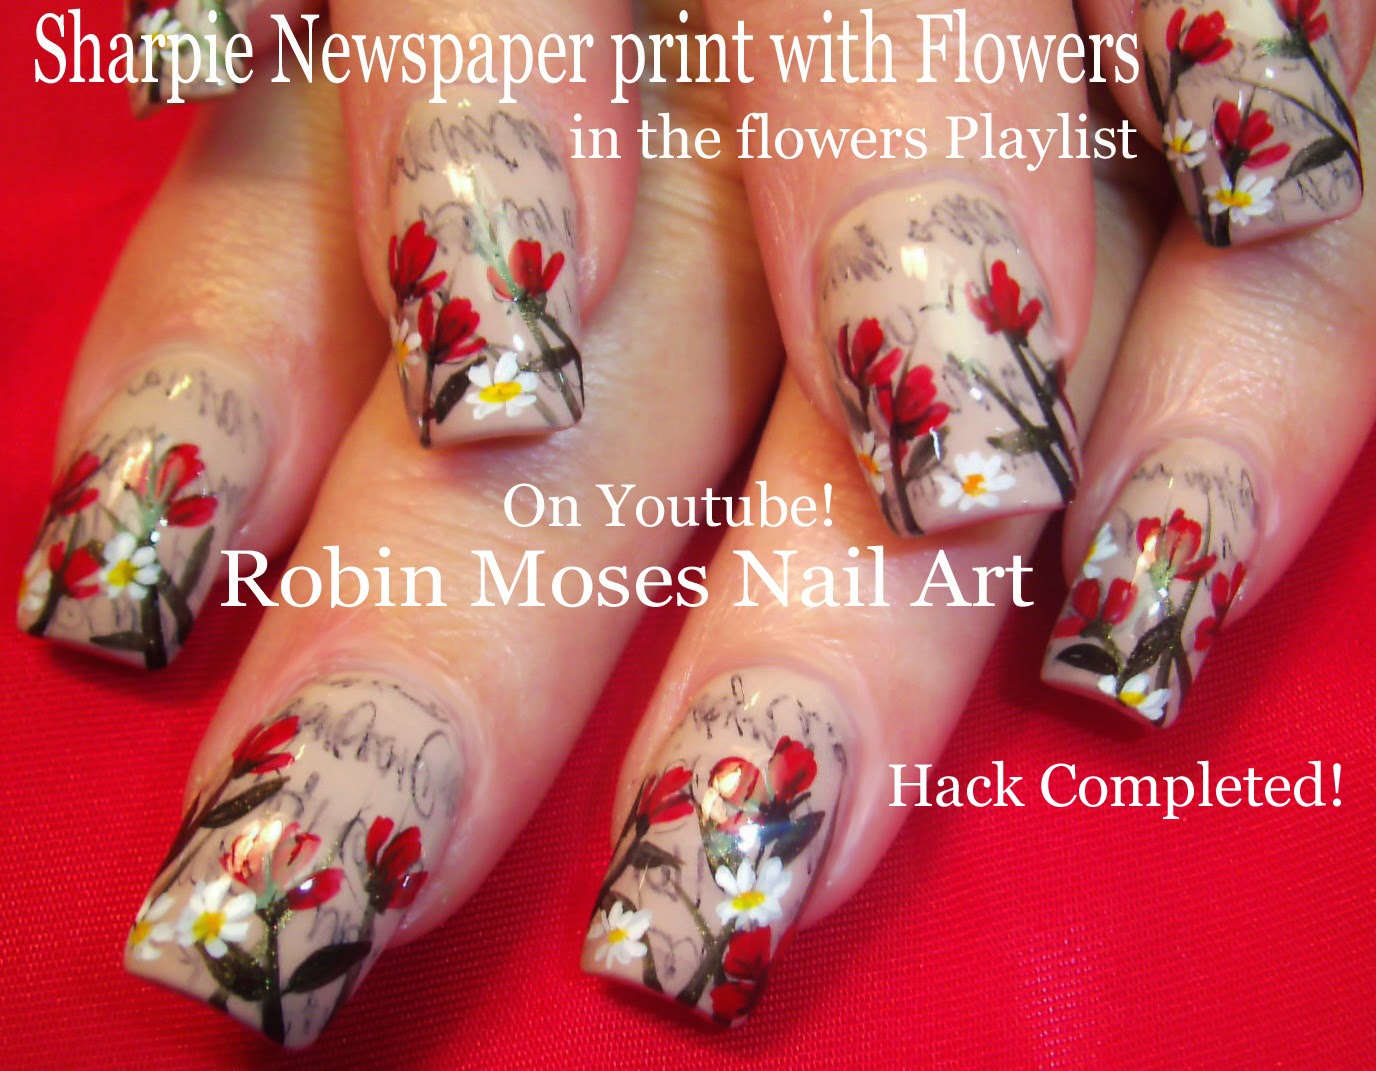 2. Simple Floral Nail Art Tutorial - wide 3